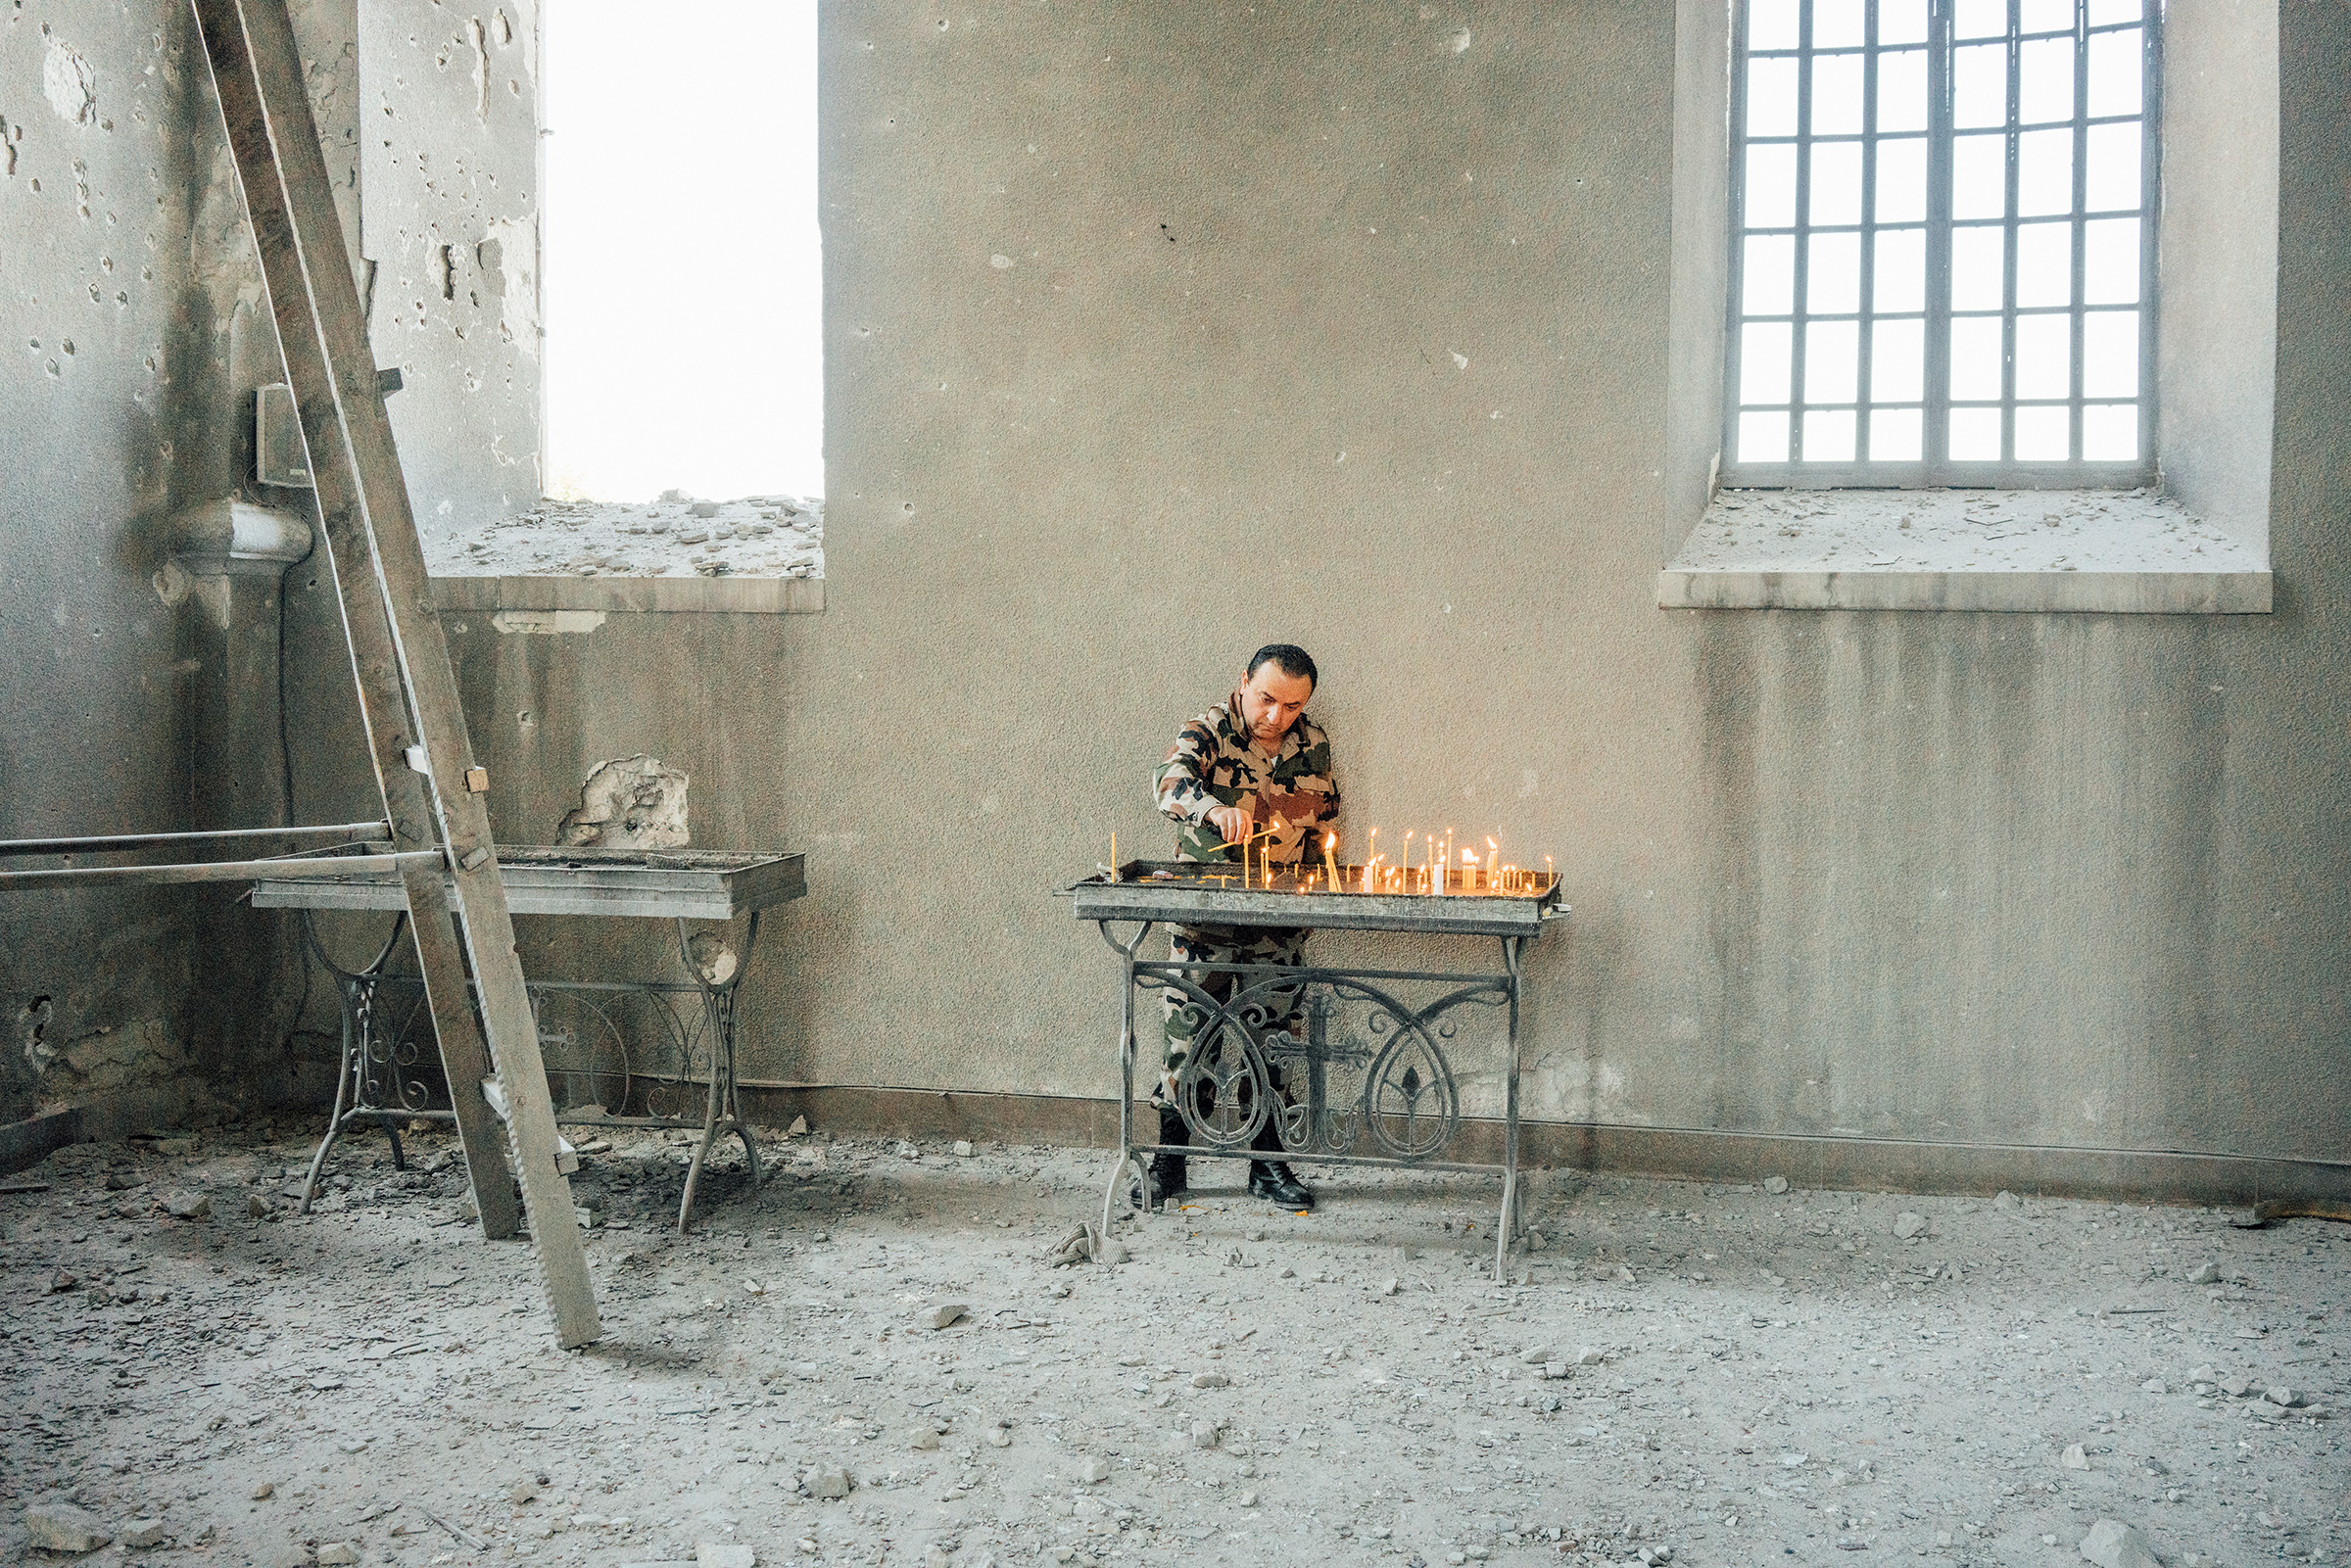 An Armenian soldier lights candles inside the Holy Savior Cathedral, which was damaged by shelling, in the town of Shusha outside Stepanakert. (Emanuele Satolli)